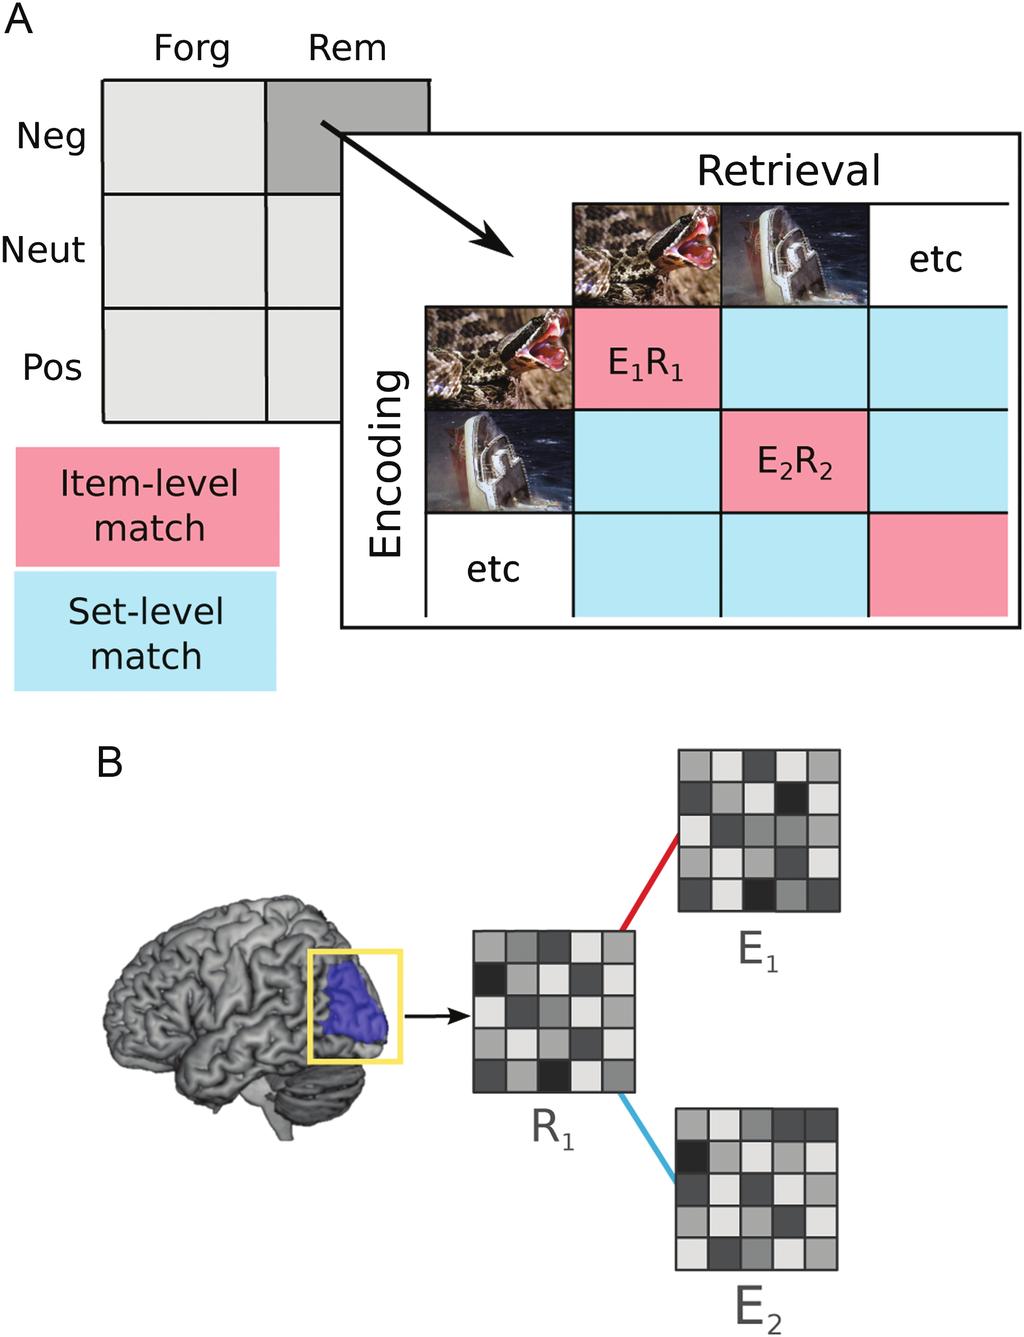 There is extensive evidence that emotional arousal increases the strength and vividness of declarative memories, thought to arise from its inﬂuence on encoding and consolidation processes (LaBar and